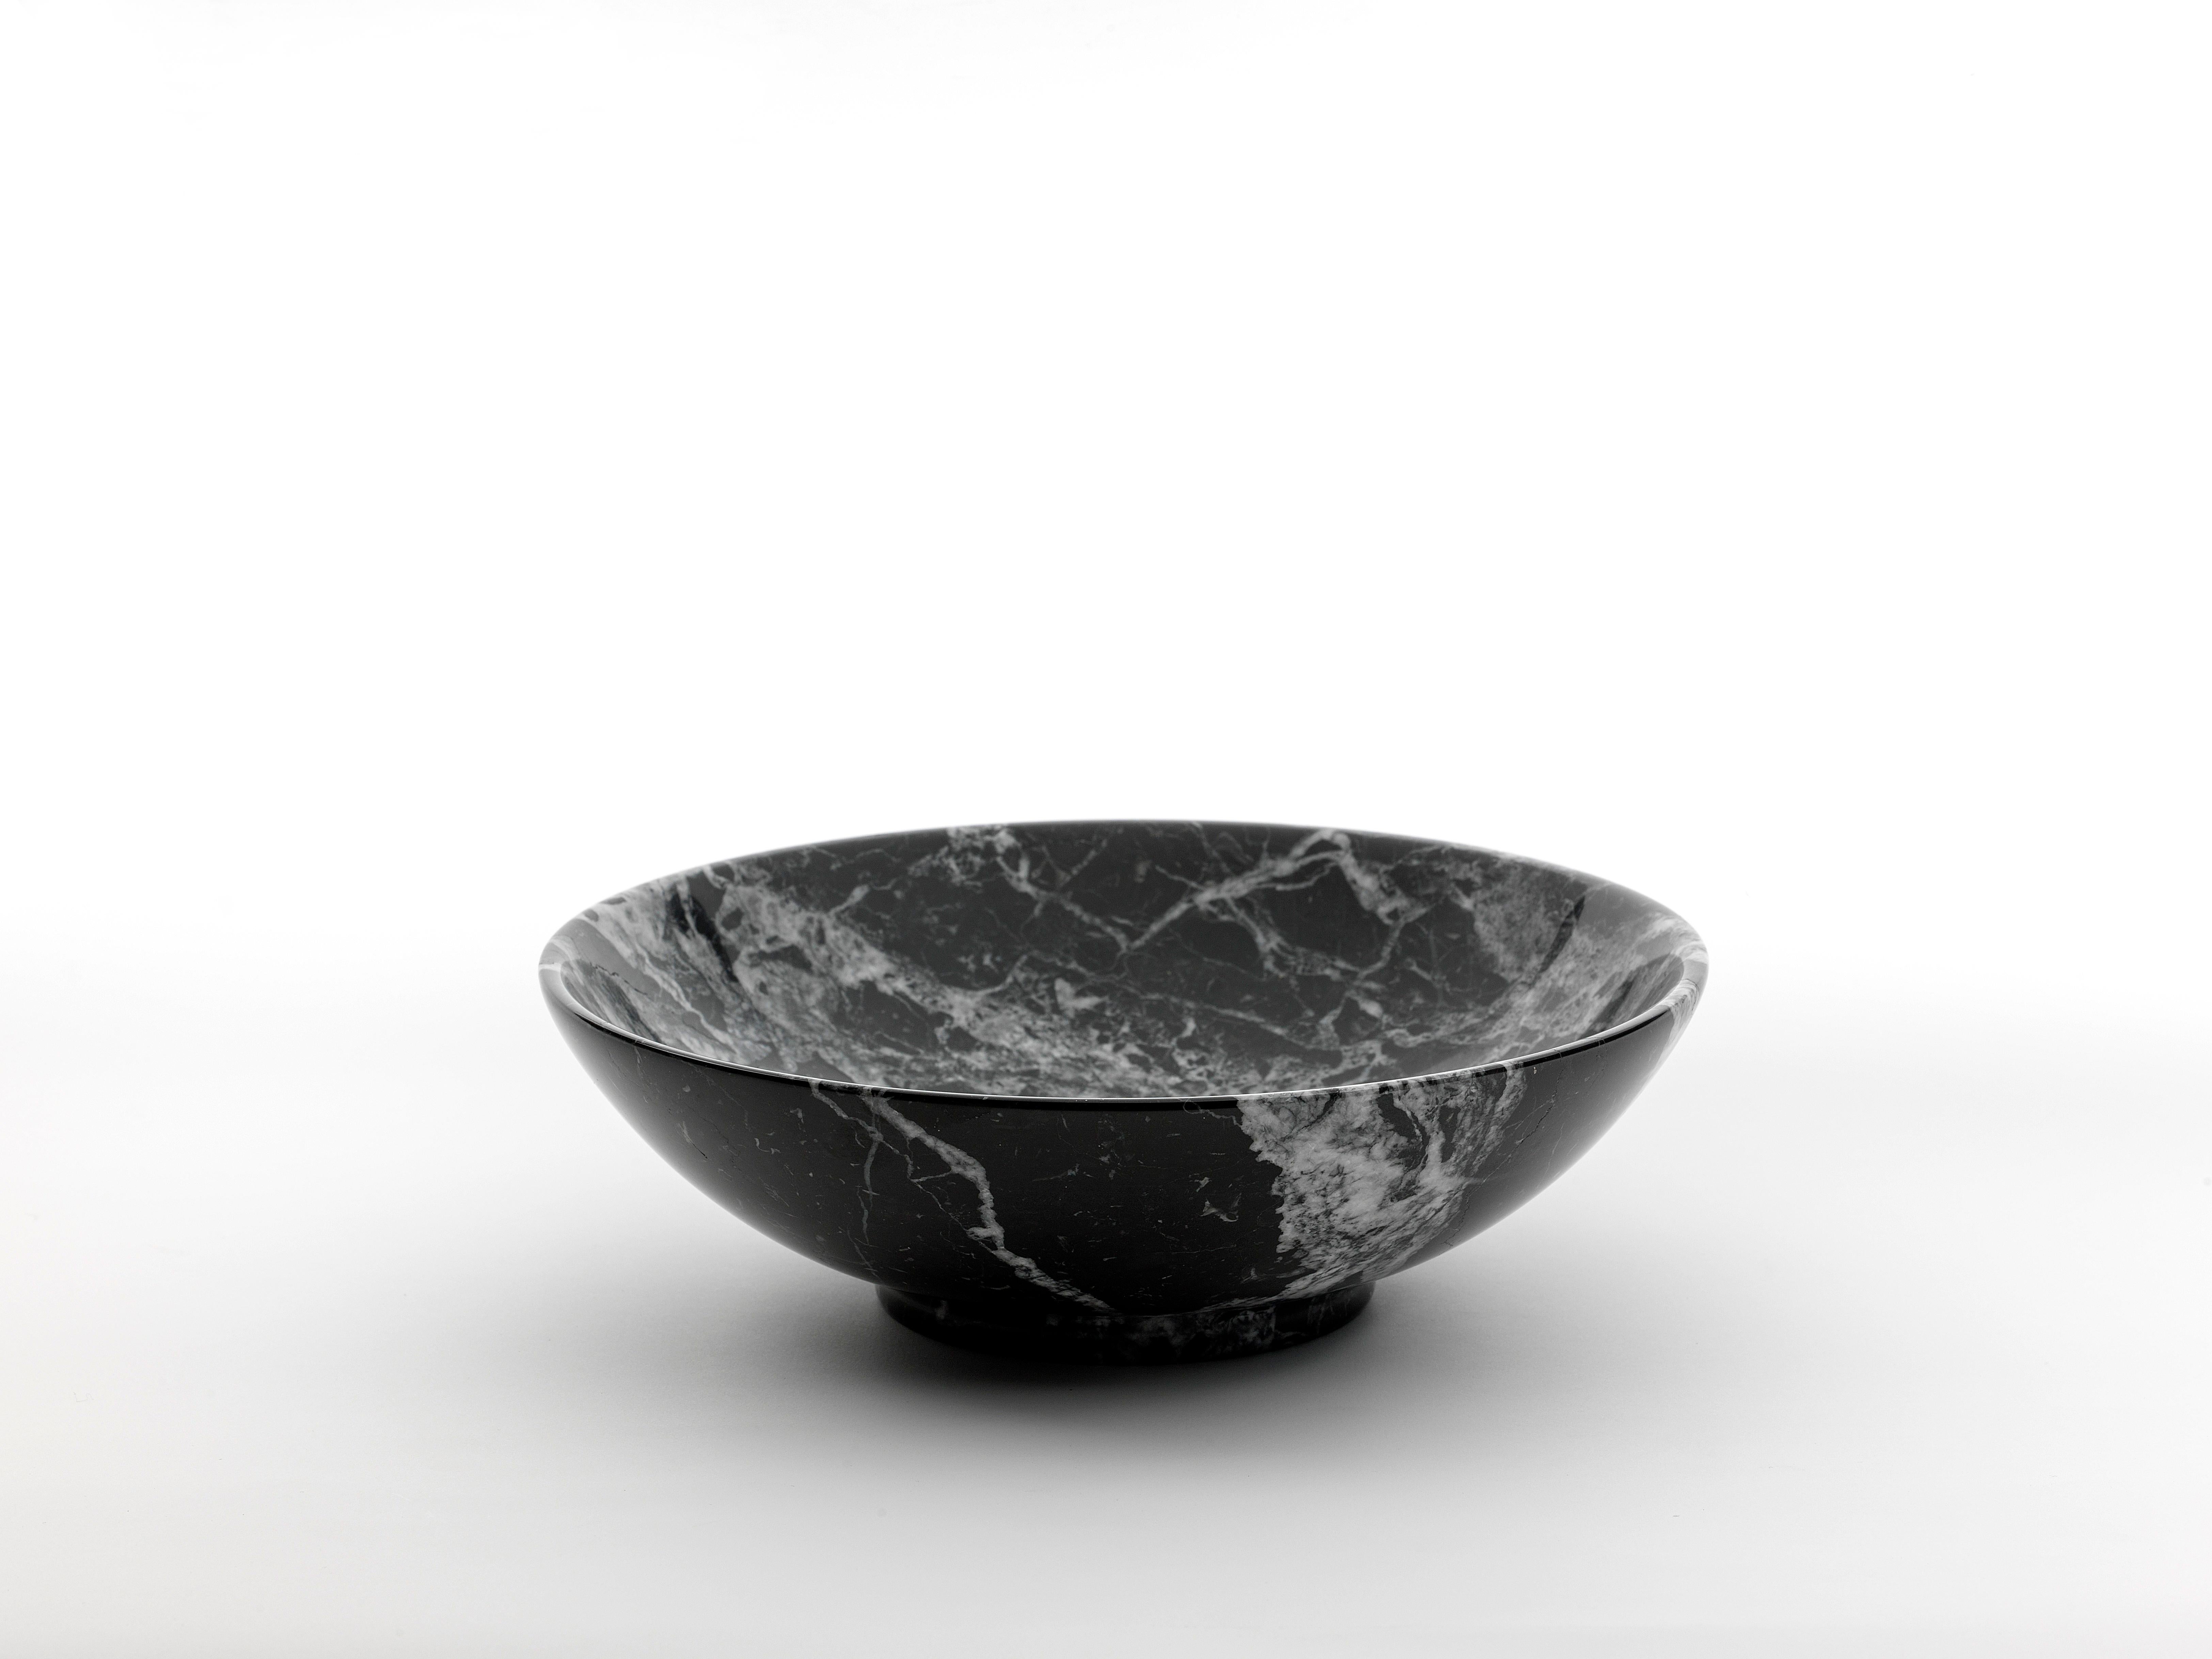 Bowl in black marble ideal for fruit and to present food. Each piece is in a way unique (every marble block is different in veins and shades) and handmade by Italian artisans specialized over generations in processing marble. Slight variations in